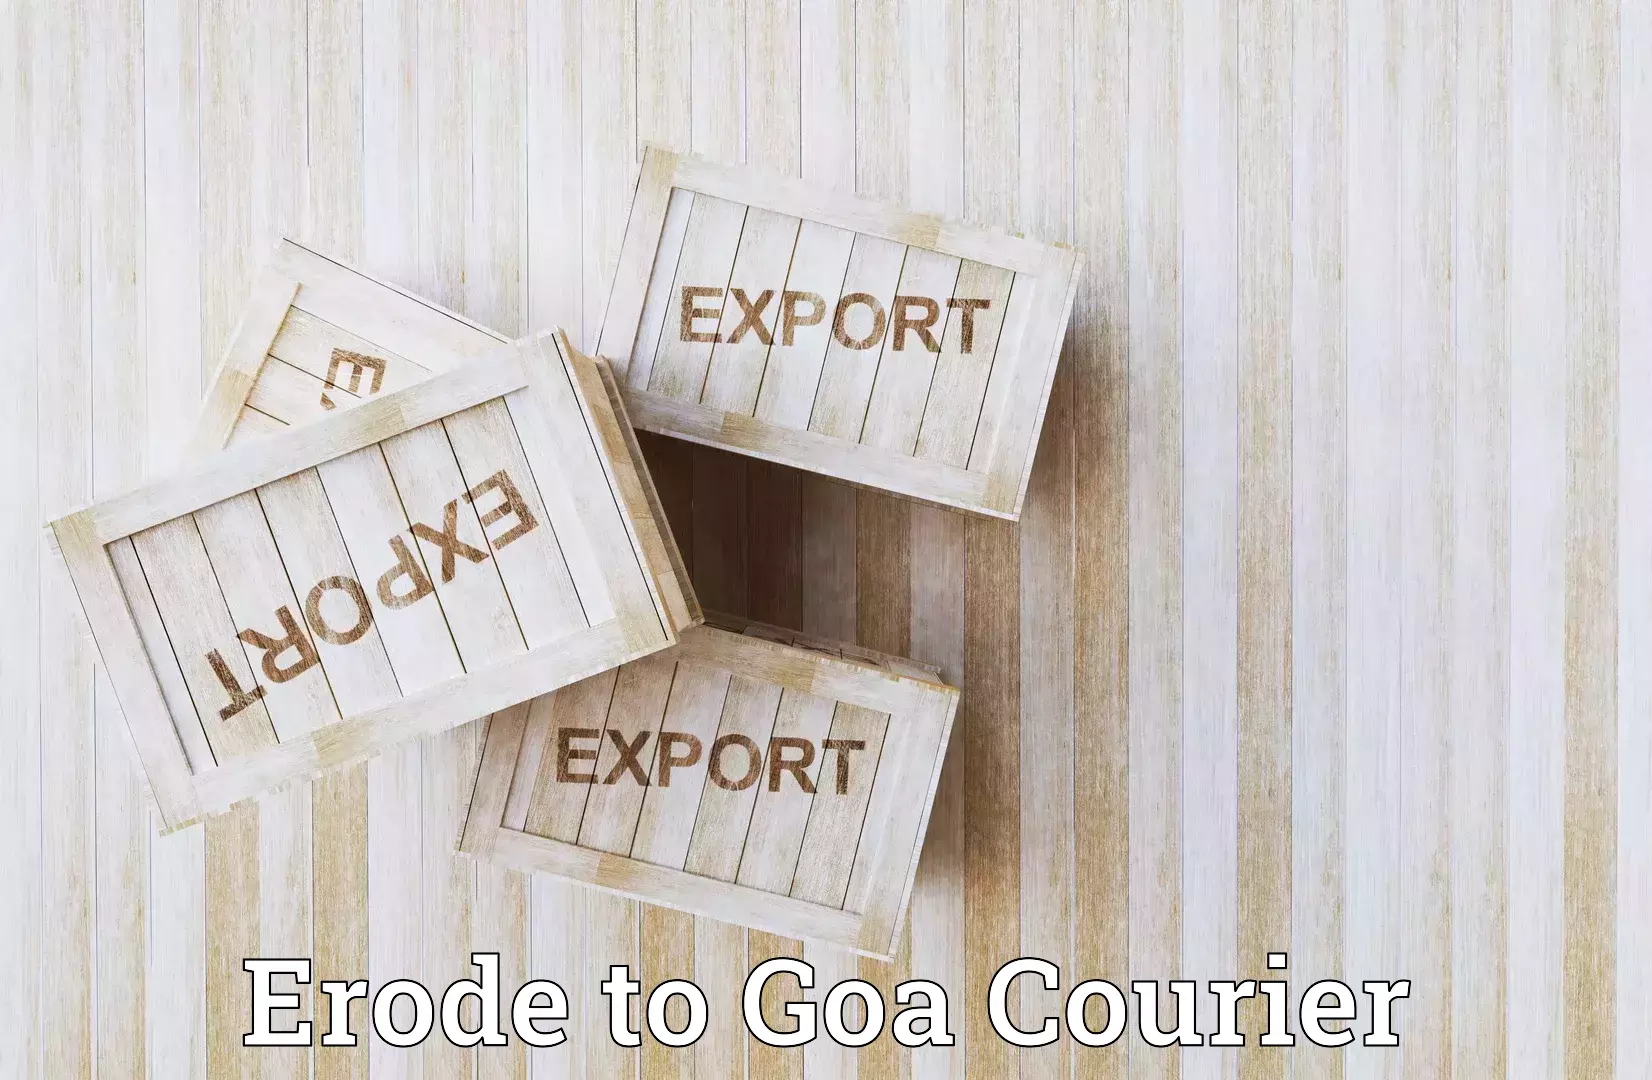 State-of-the-art courier technology Erode to Margao